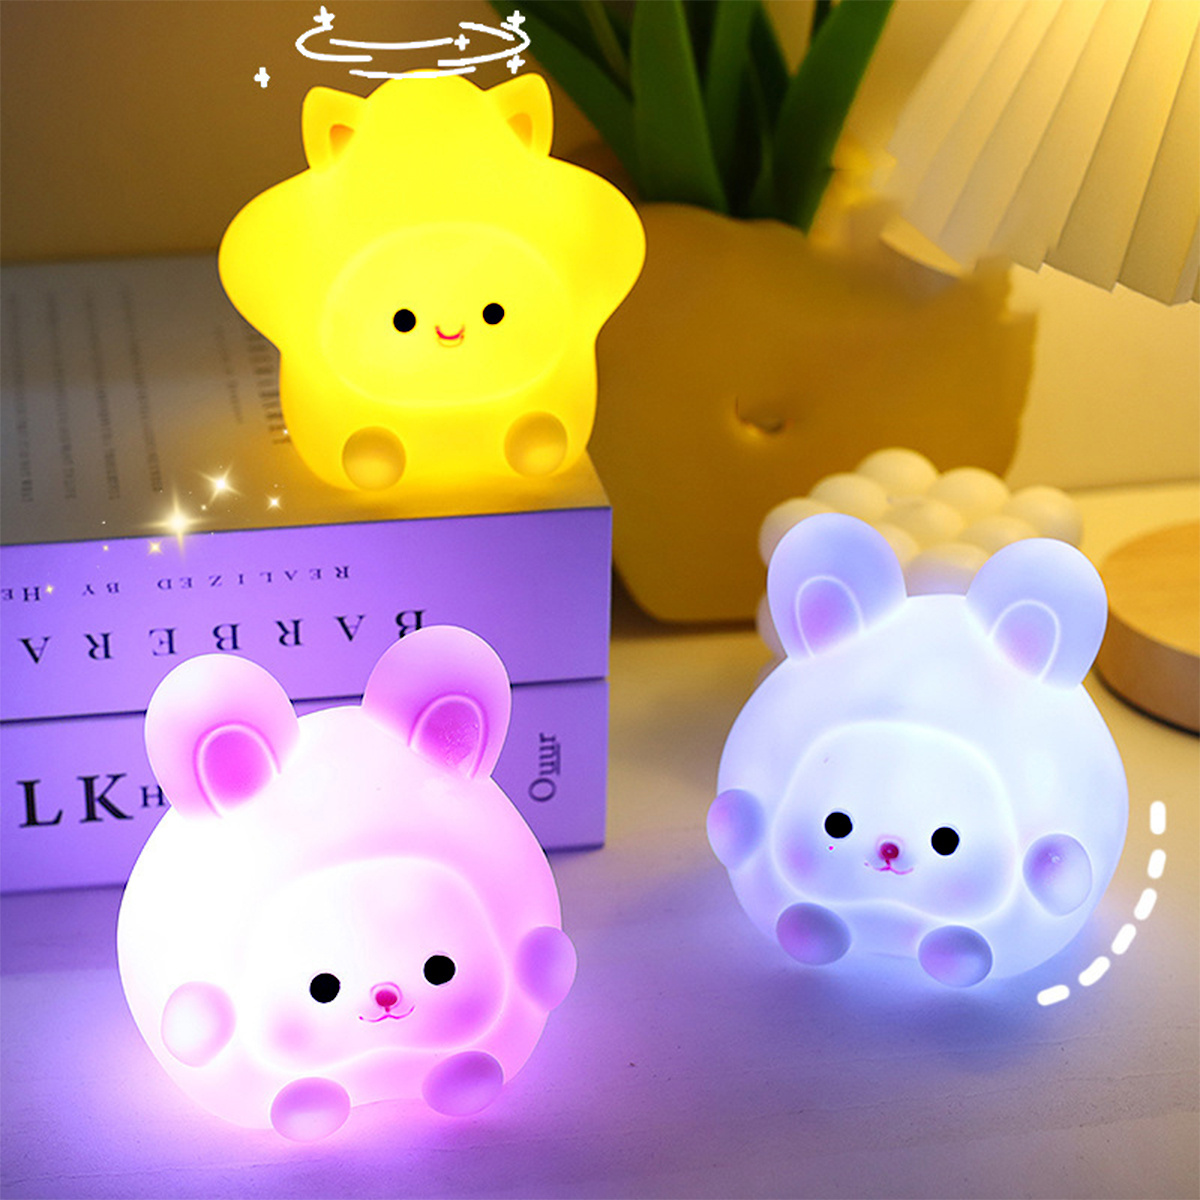 1pc cute cartoon animal night light powered by 3 ag13 button batteries free battery led sleeping light gift for boys and girls details 6